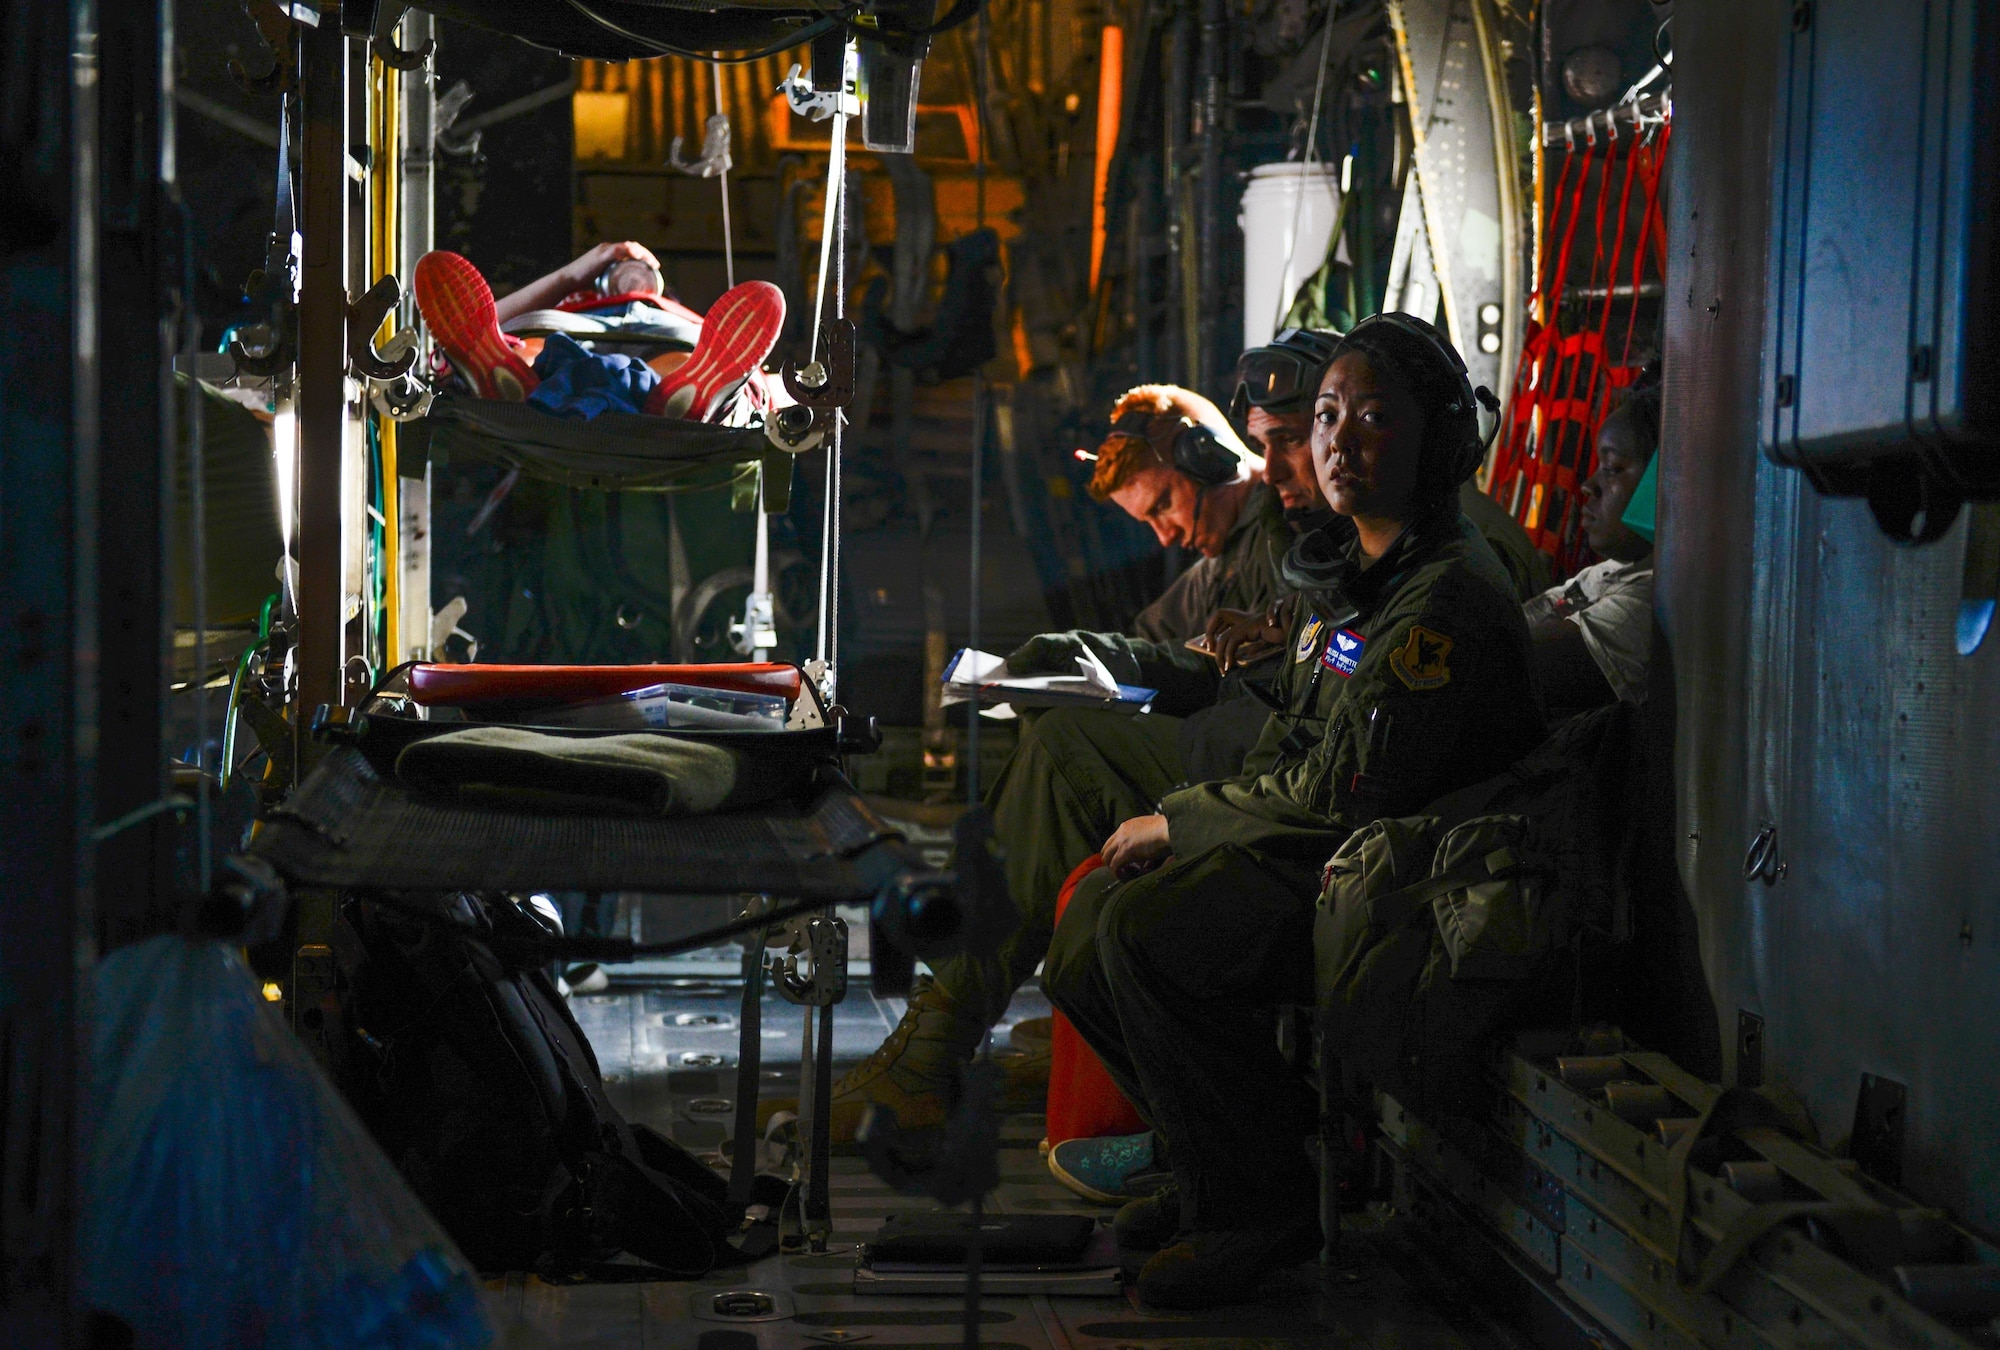 Capt. Melissa Cadorette, a flight nurse with the 18th Aeromedical Evacuation Squadron, listens to crew communications aboard a U.S. Air Force C-130 Hercules Feb. 15, 2016, during an expeditionary medical support exercise on the island of Rota. Exercise Cope North 16 enhances humanitarian assistance and disaster relief crisis response capabilities between six nations and lays the foundation for regional cooperation during real-world contingencies in the Indo-Asia-Pacific region. (U.S. Air Force photo by Staff Sgt. Alexander W. Riedel/Released)